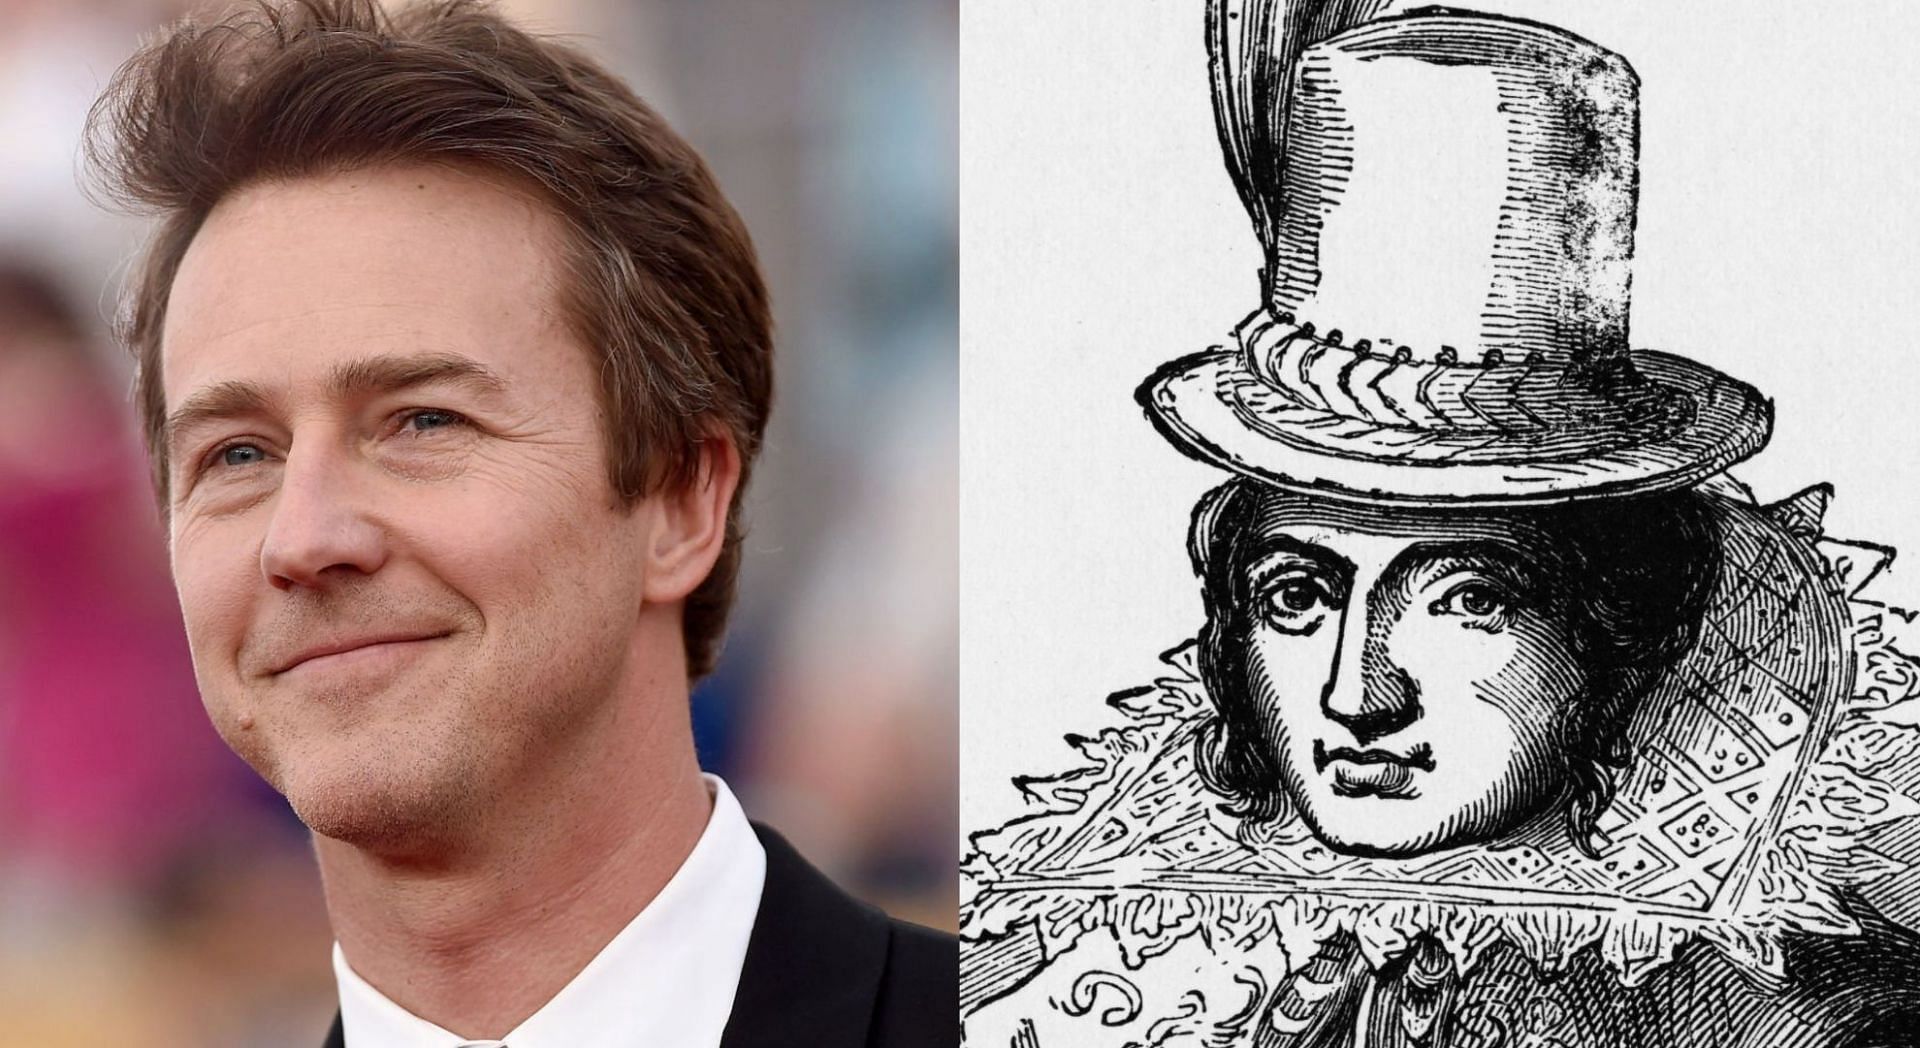 Pocahontas is allegedly the 12th great-grandmother of Edward Norton (Image via Getty Images)